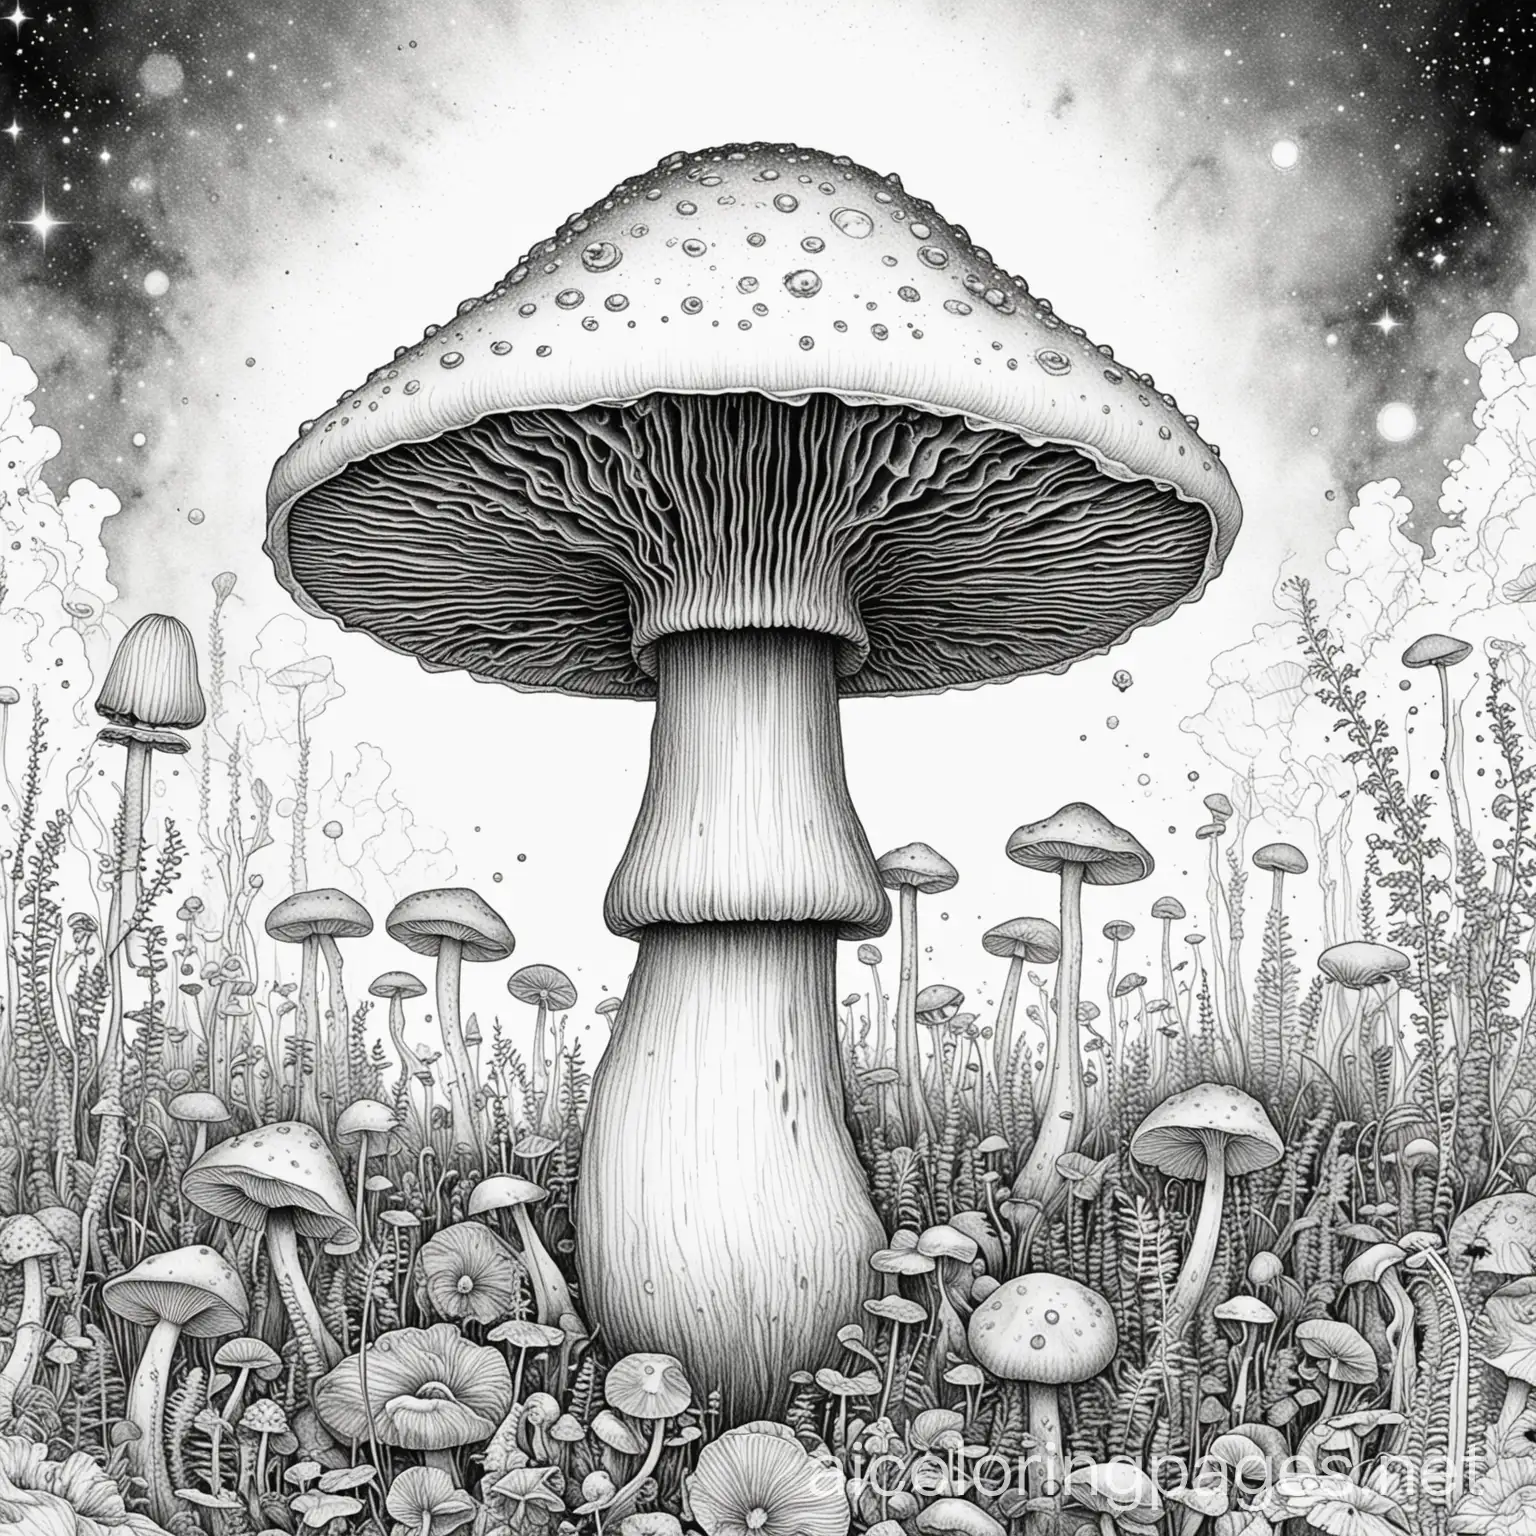 trippy outerspace mushroom artronaught, Coloring Page, black and white, line art, white background, Simplicity, Ample White Space. The background of the coloring page is plain white to make it easy for young children to color within the lines. The outlines of all the subjects are easy to distinguish, making it simple for kids to color without too much difficulty